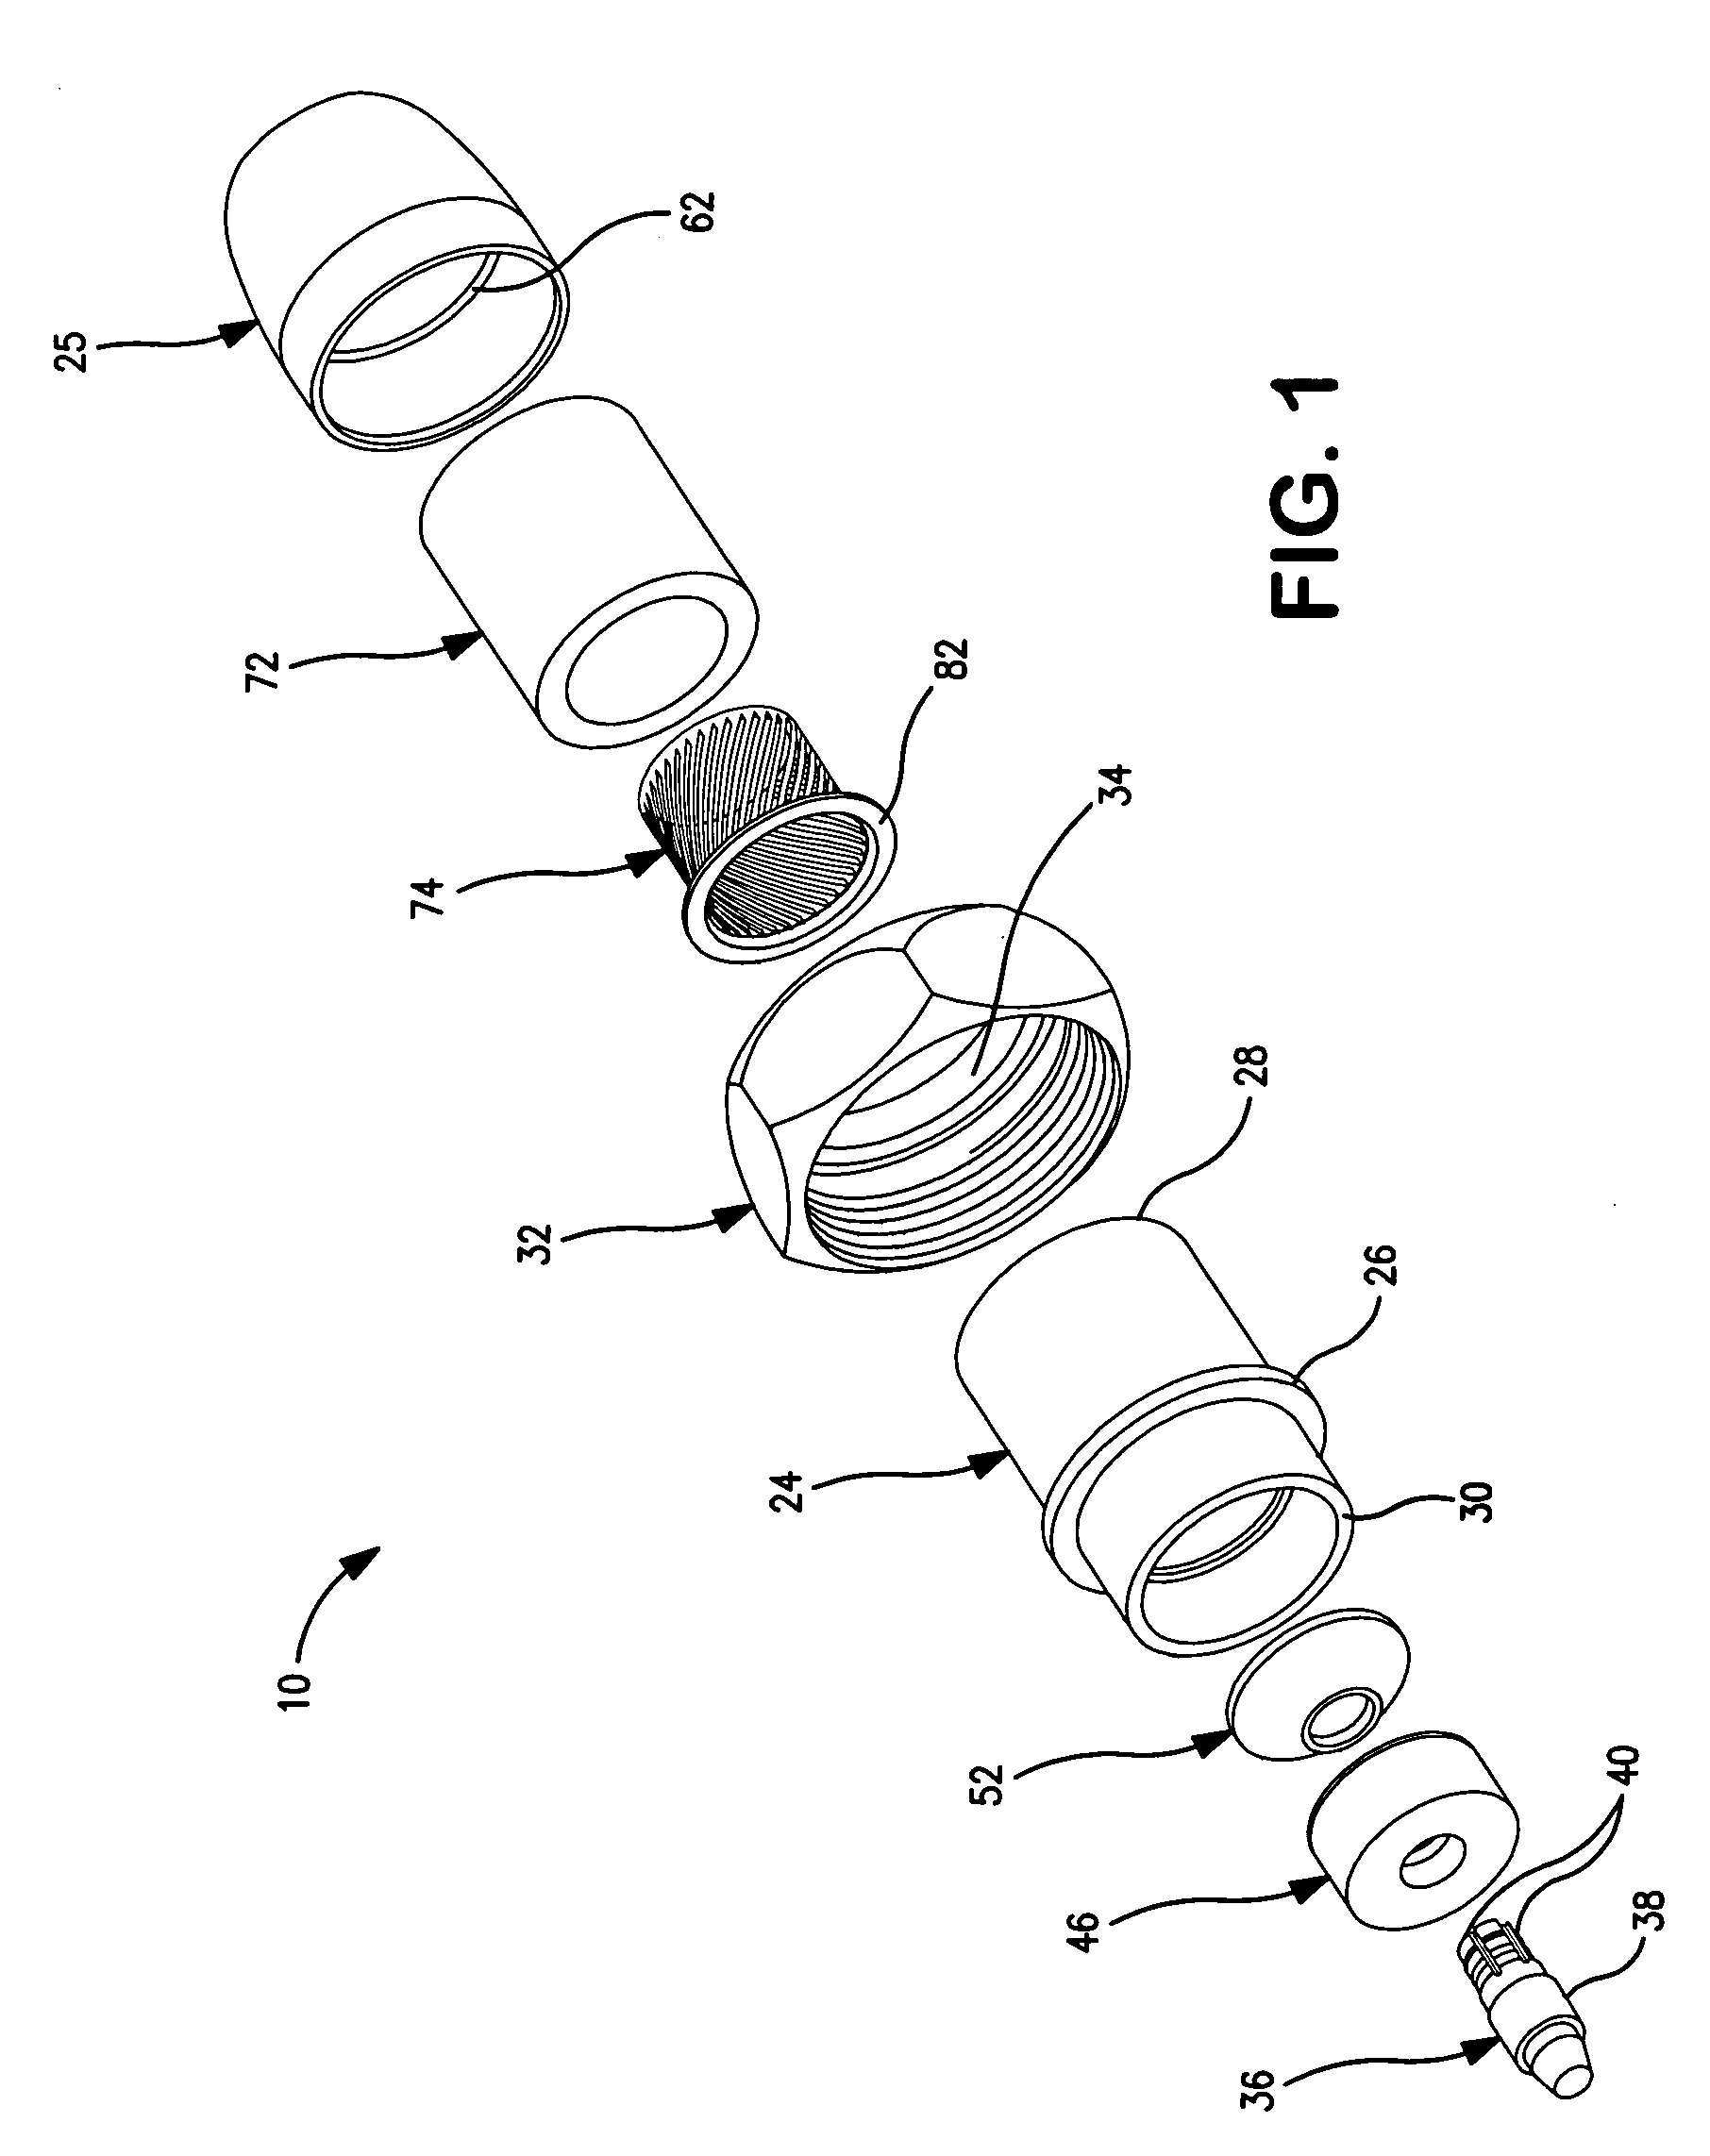 Connector for corrugated coaxial cable and method